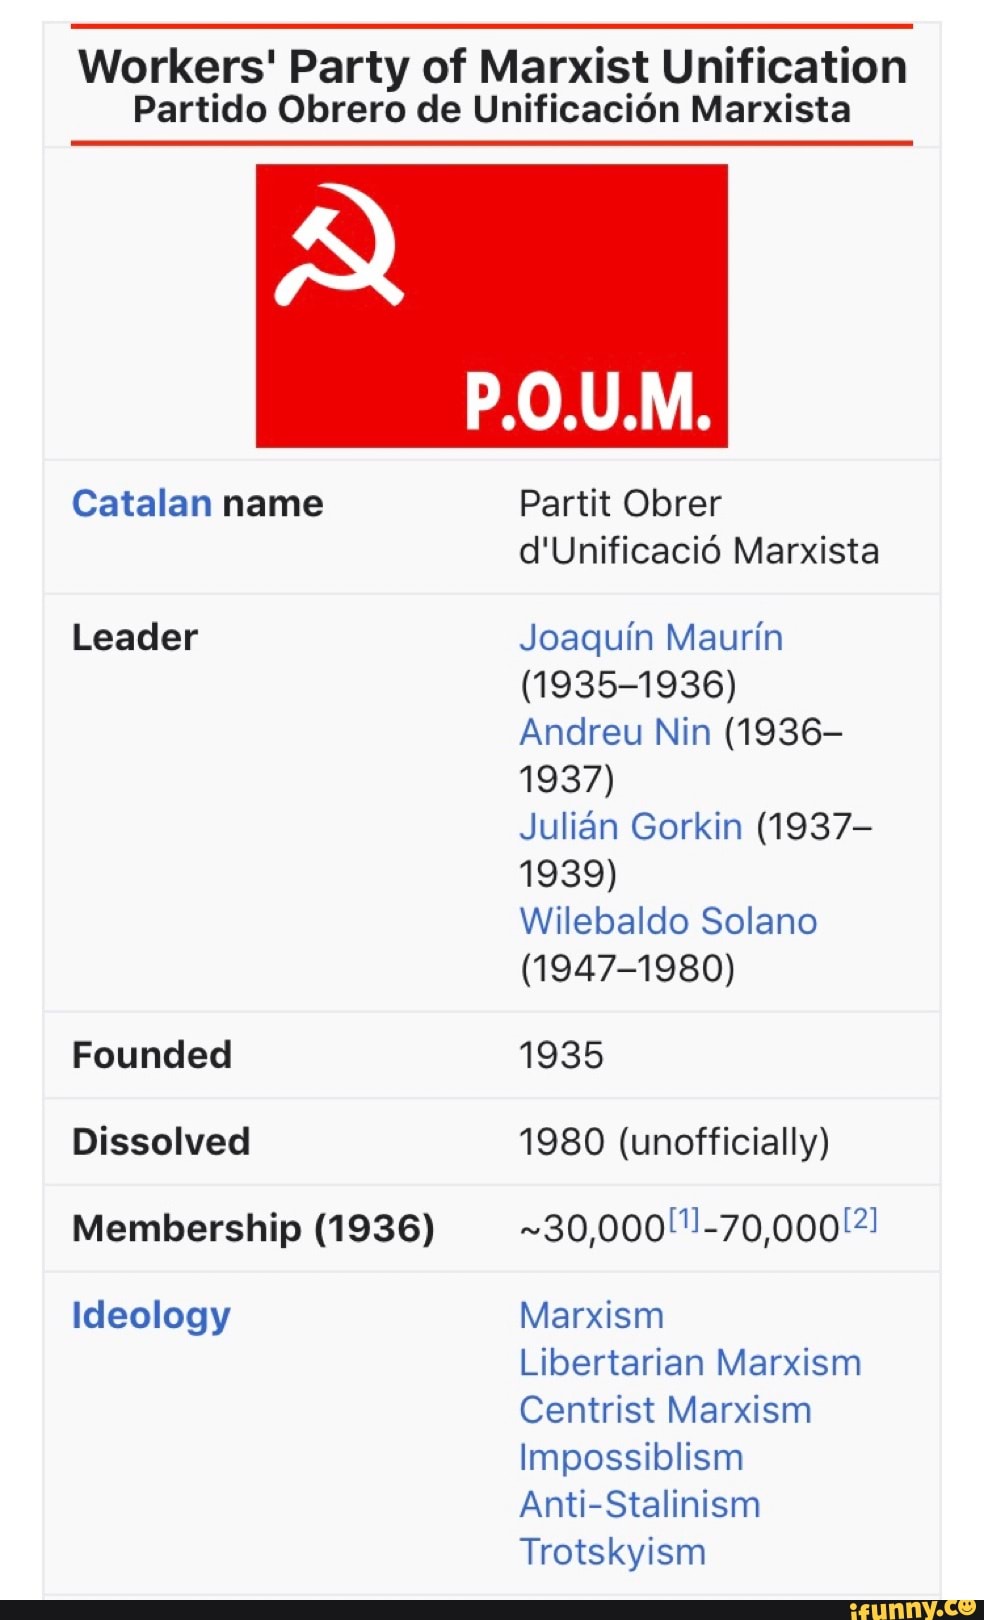 The Workers Party of Marxist Unification (POUM)